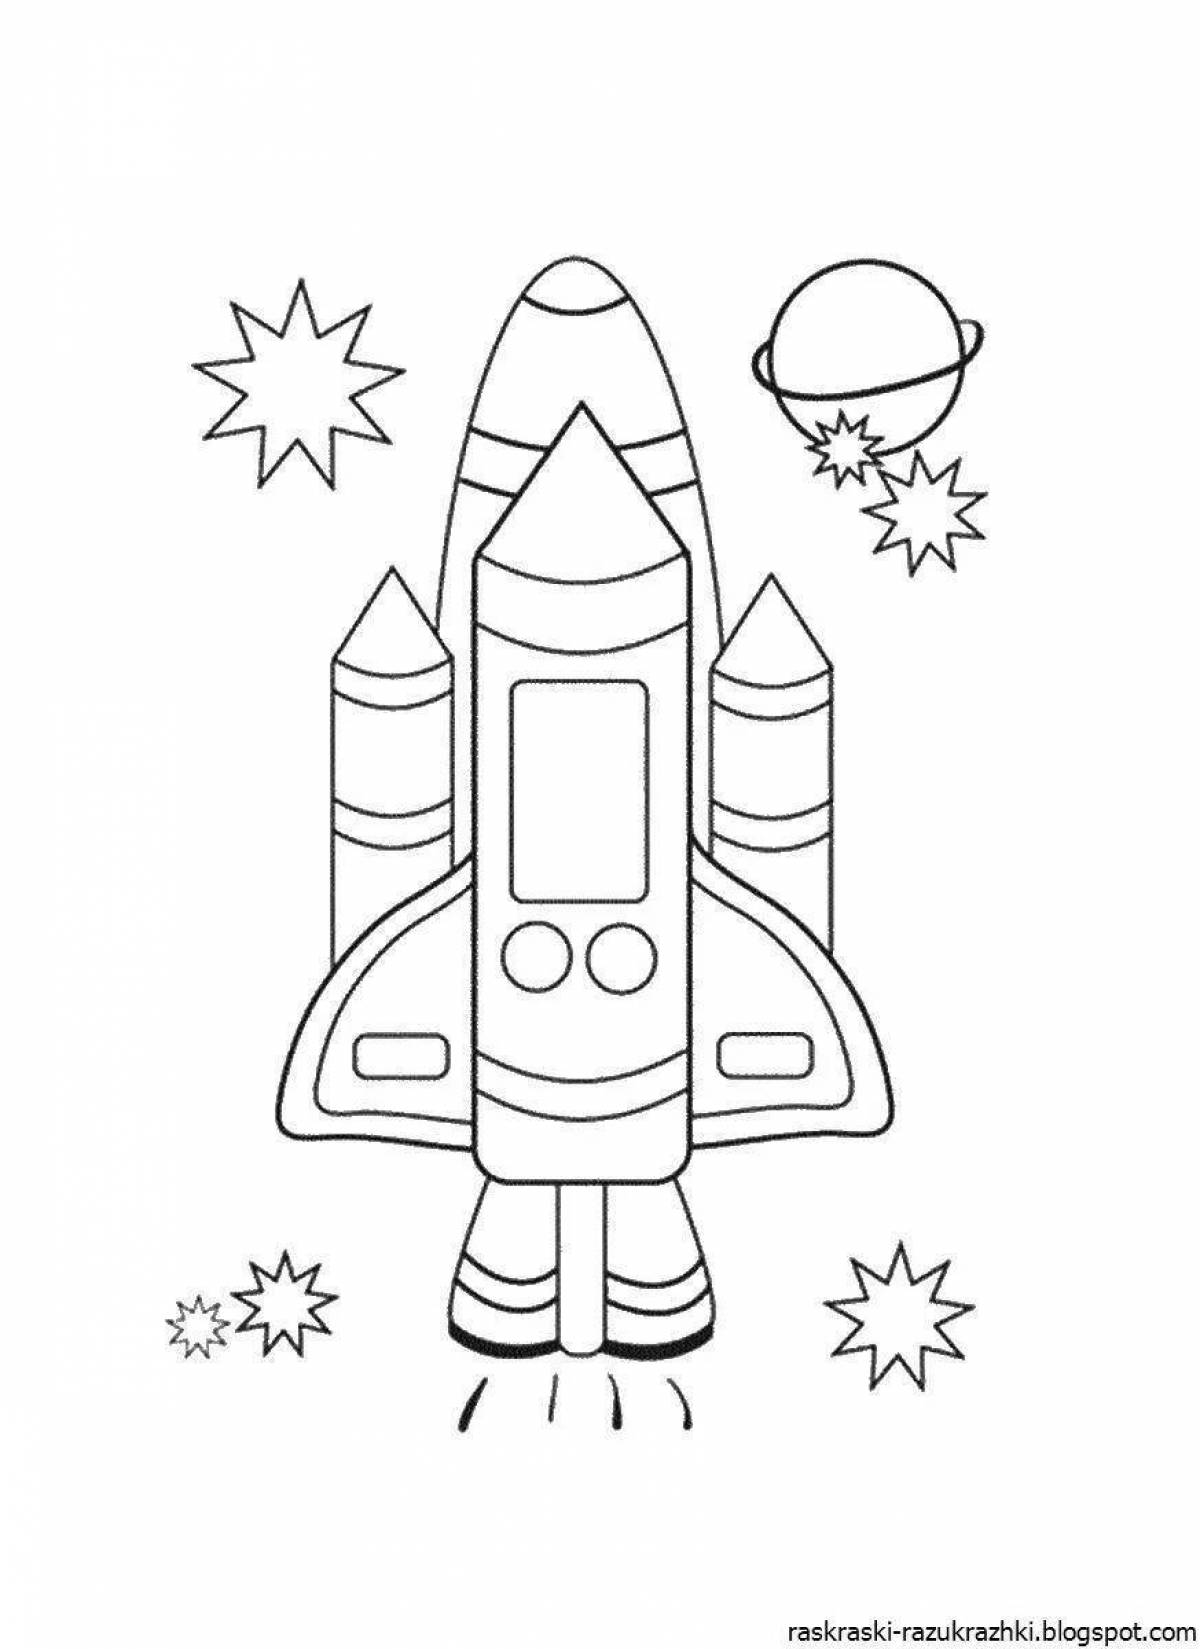 Exciting rocket drawing for kids